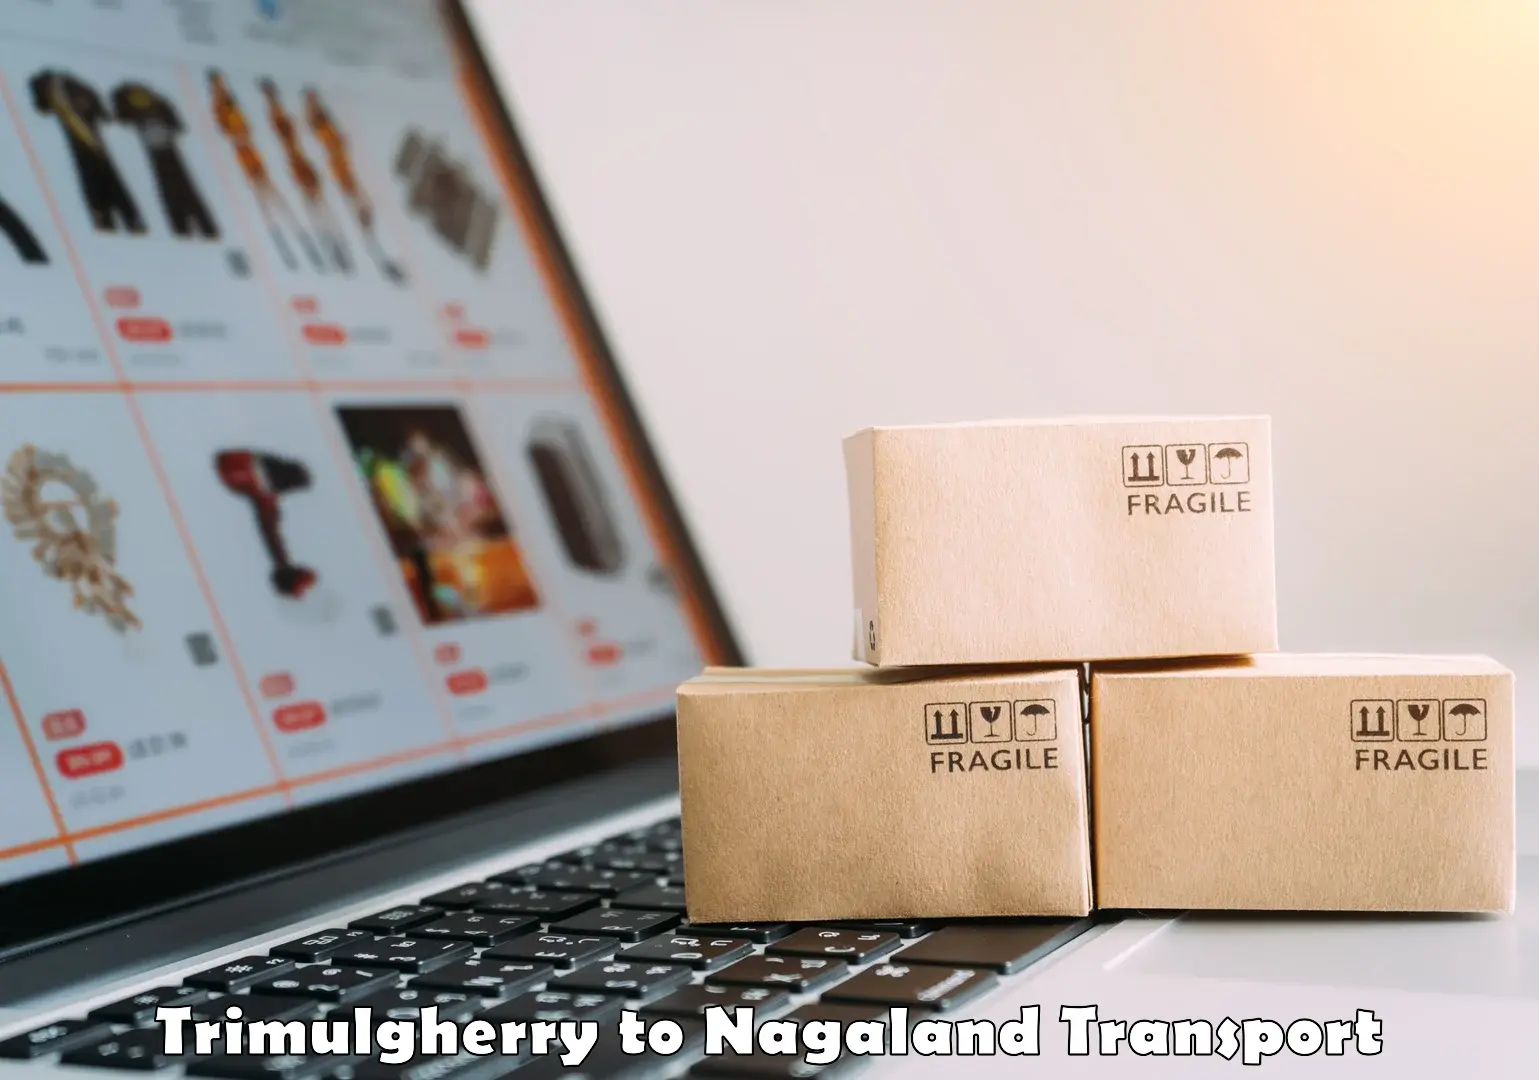 Container transport service Trimulgherry to NIT Nagaland